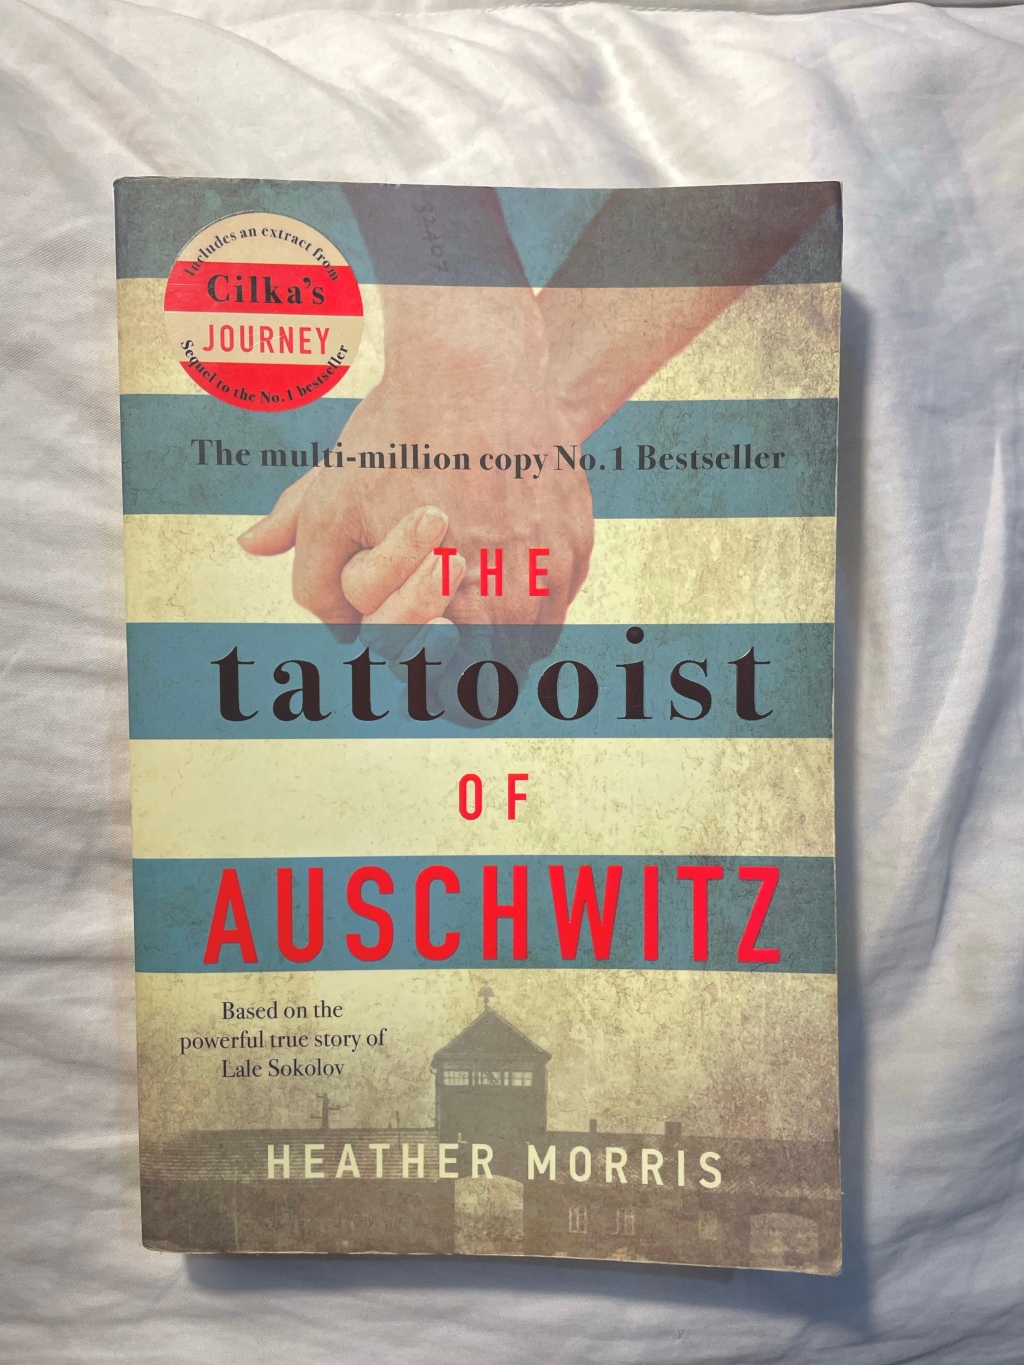 The Tattooist of Auschwitz; The History of this Historical Fiction